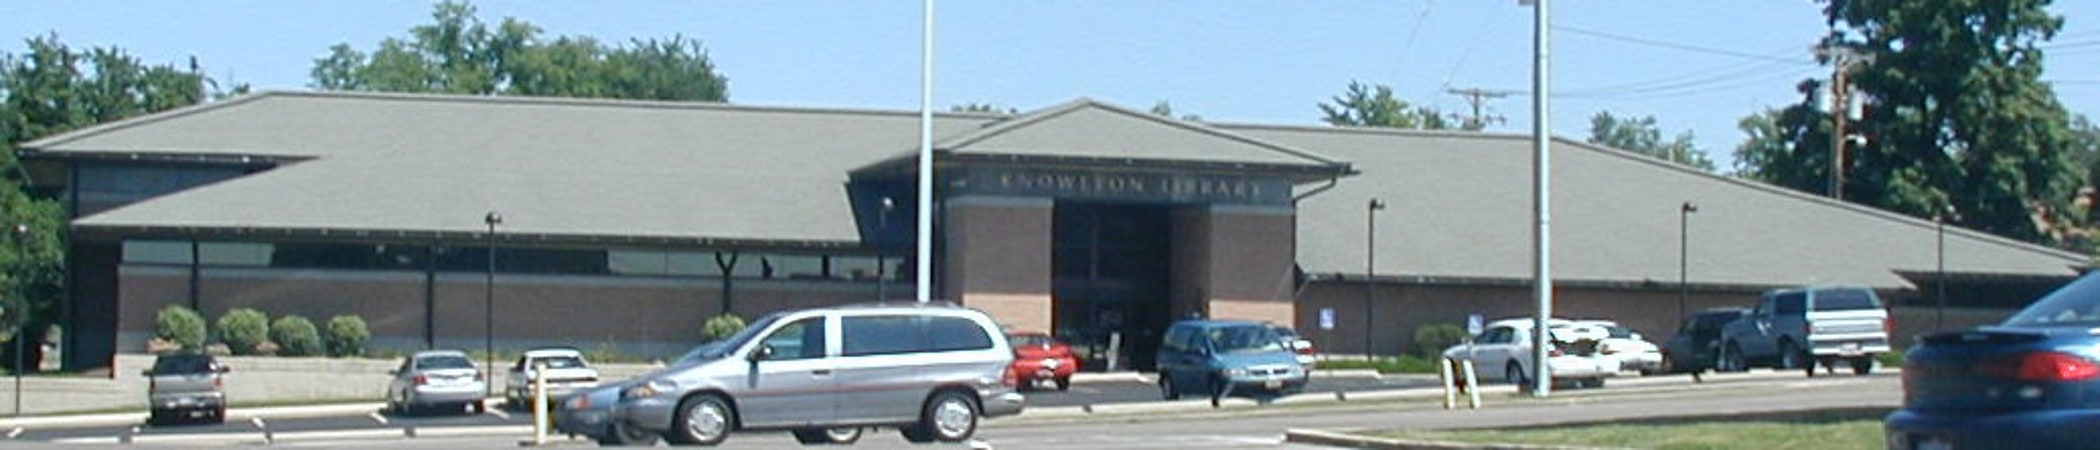 Logan County District Library